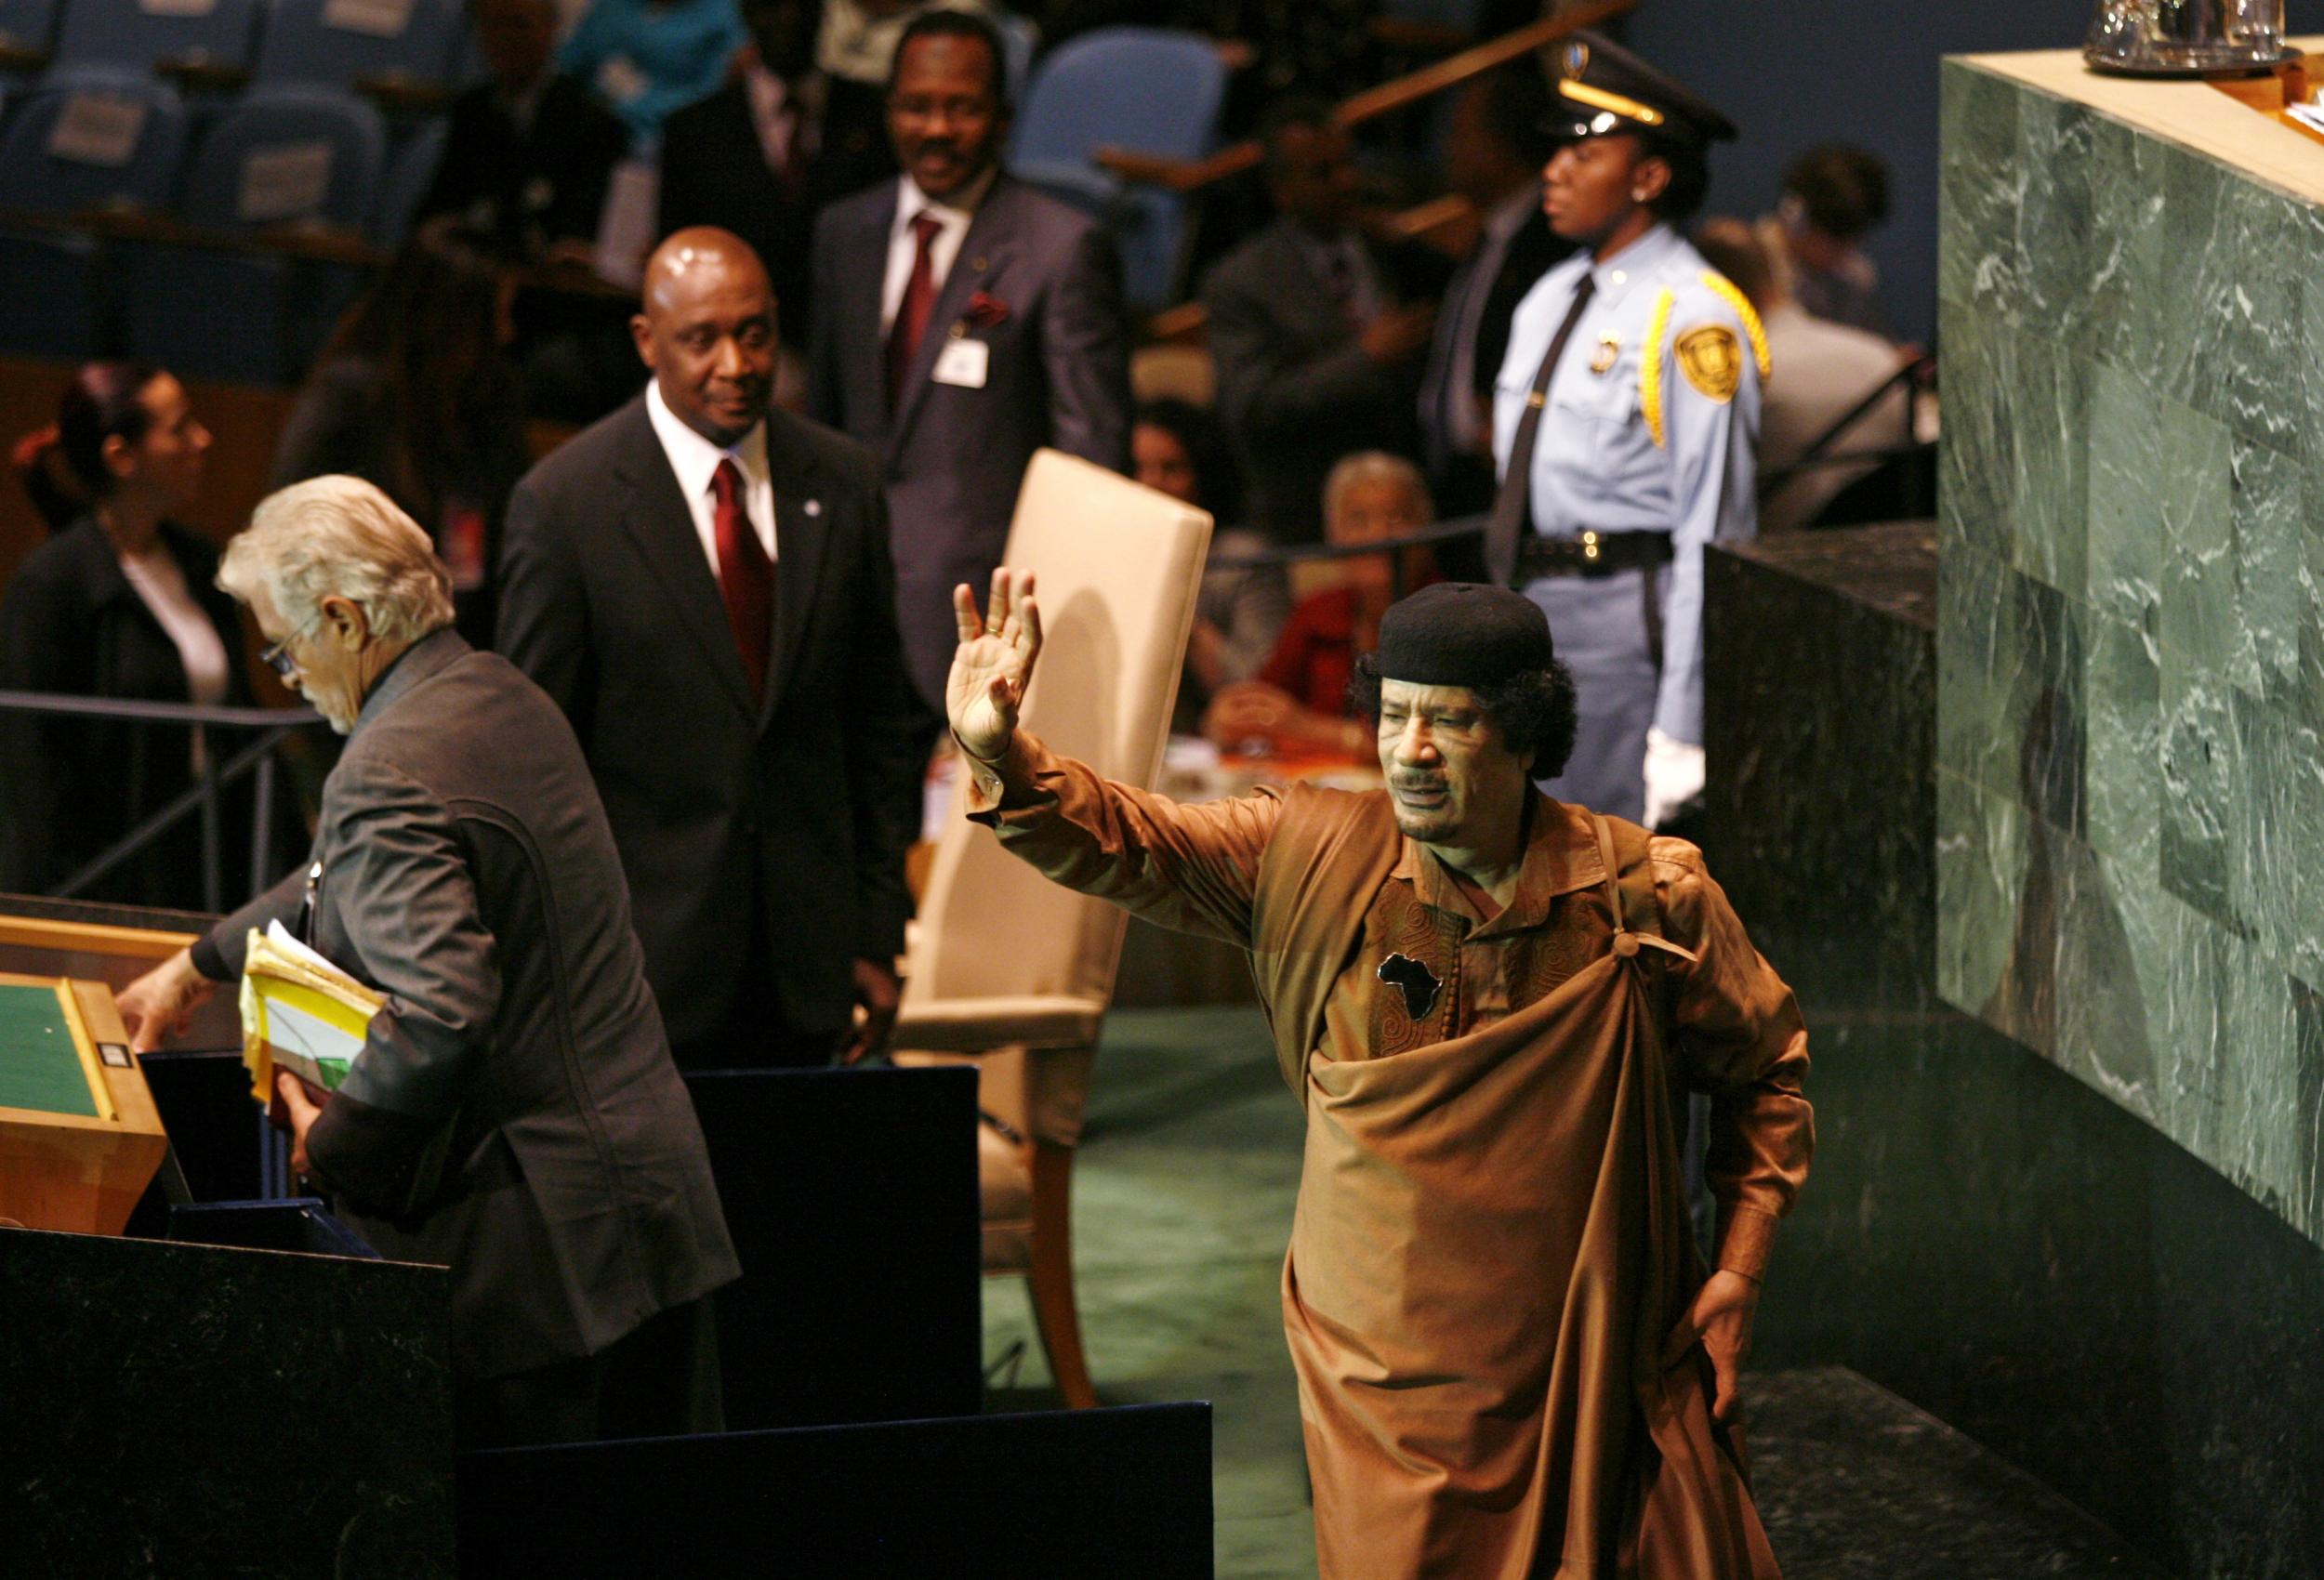 Libyan dictator Muammar Gaddafi at the United Nations general assembly in 2009 (Reuters)